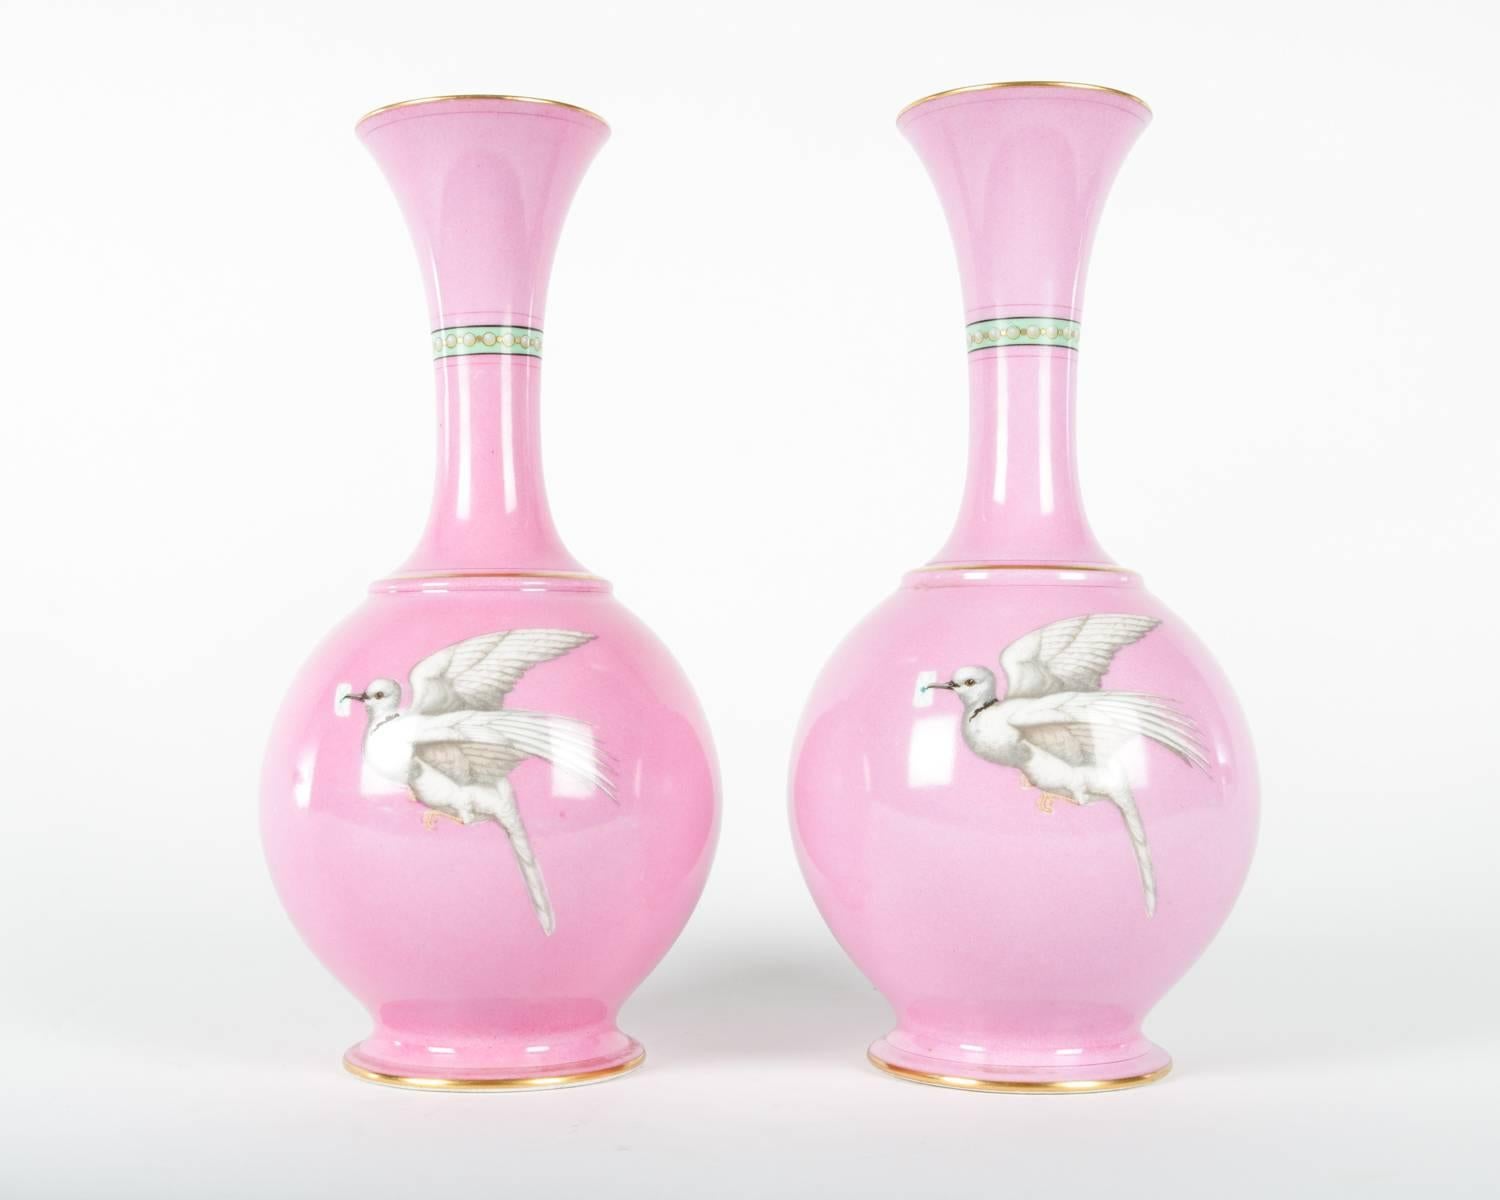 Pair of vintage English pink decorative vases with hand-painted swallows and doves. Gilt lip and base. Measures: 12 inches tall and 6 inches wide each.